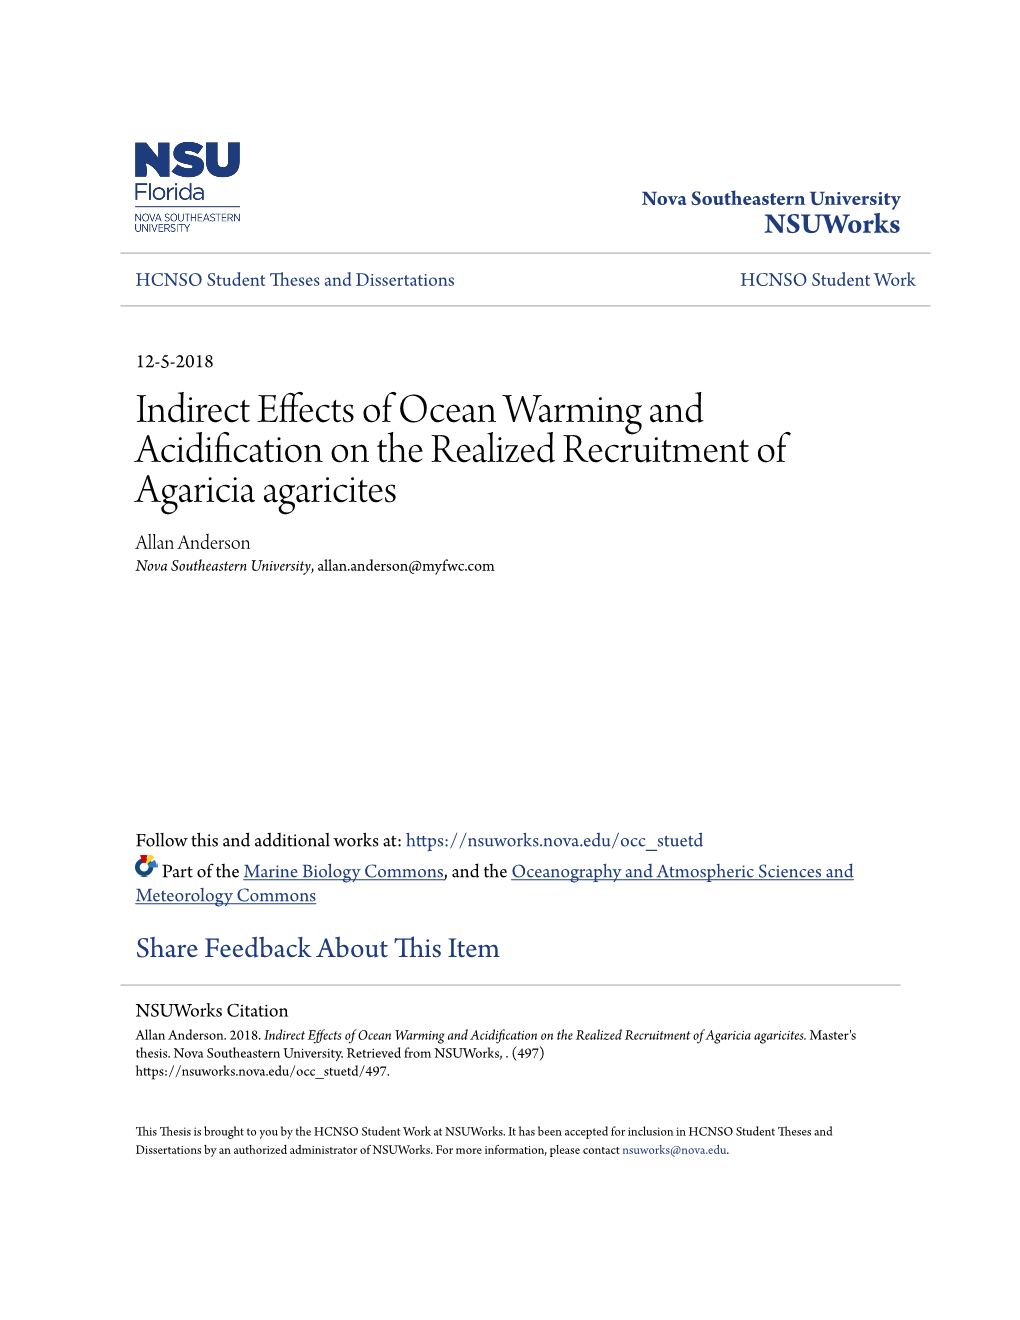 Indirect Effects of Ocean Warming and Acidification on the Realized